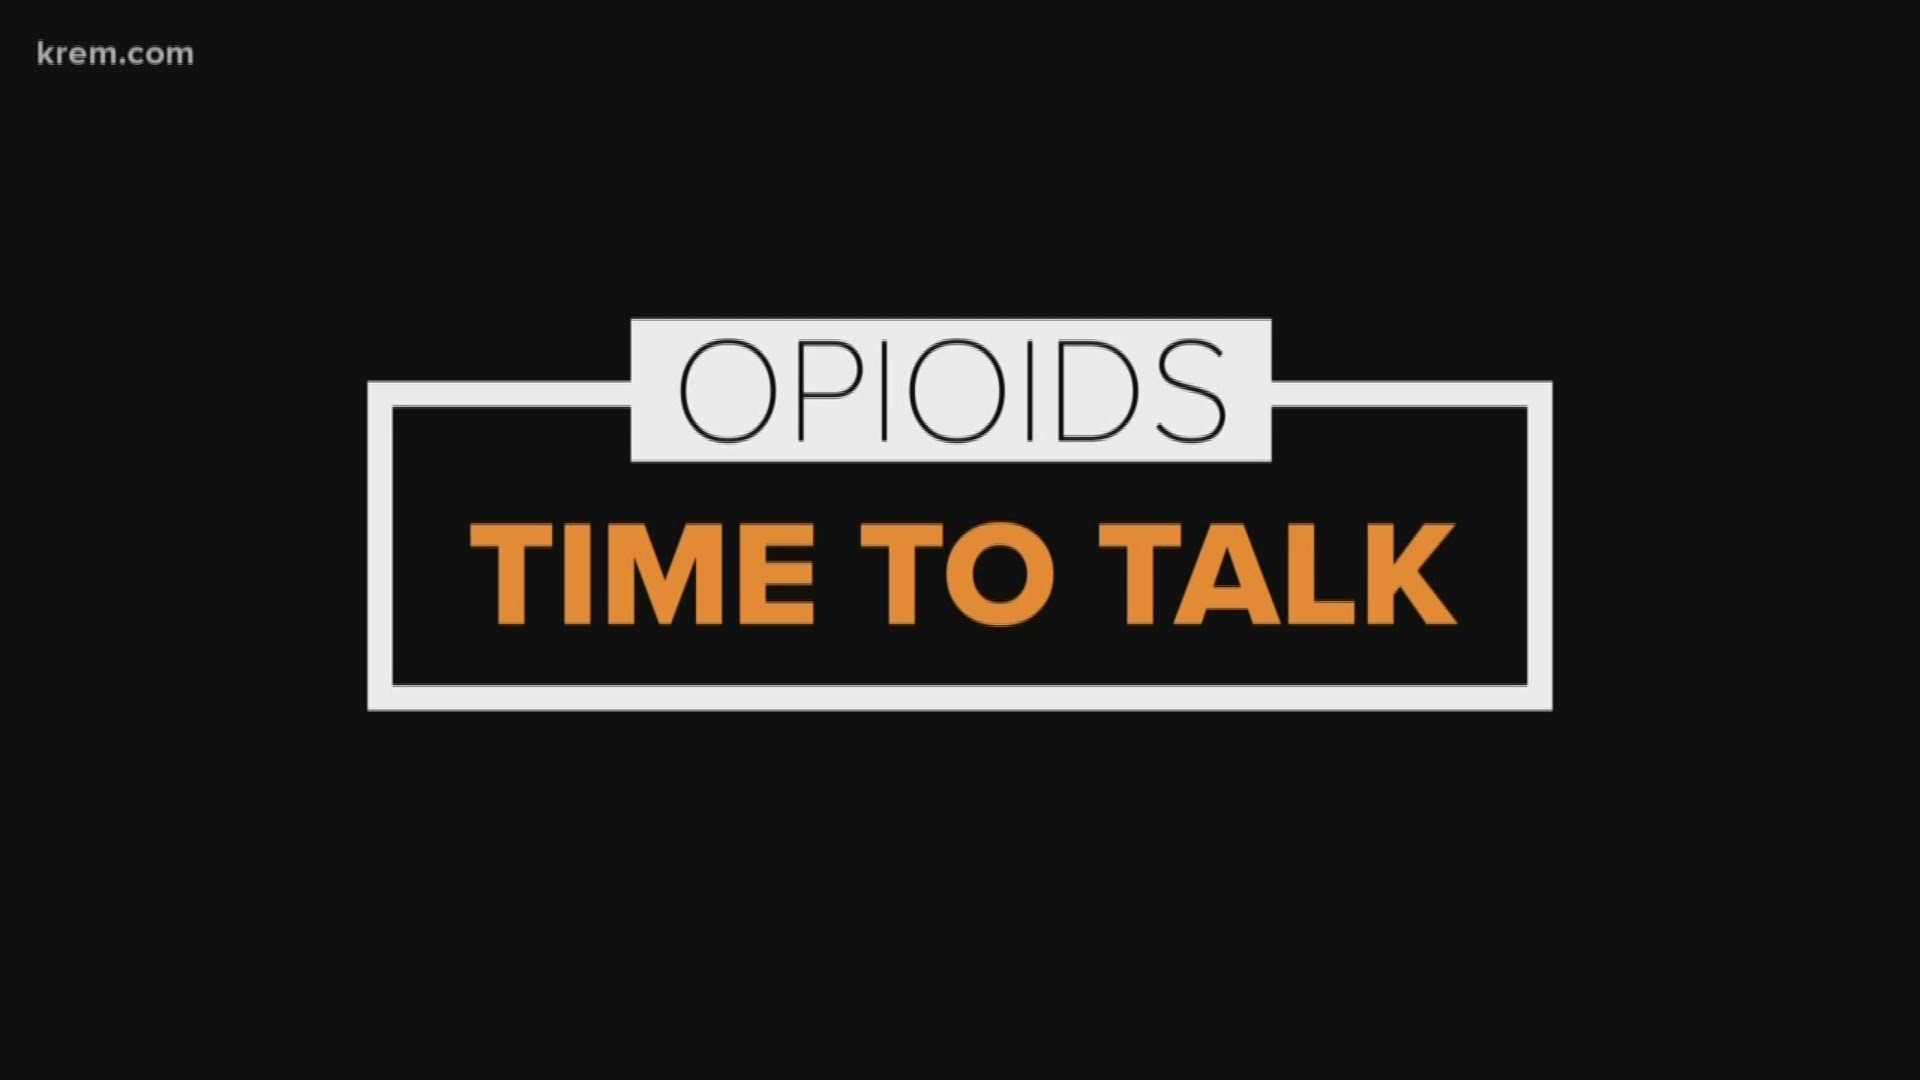 In an effort to start a conversation, KREM spoke with people battling opioid addiction in our community and explored how to find help in Spokane and the Inland Northwest.